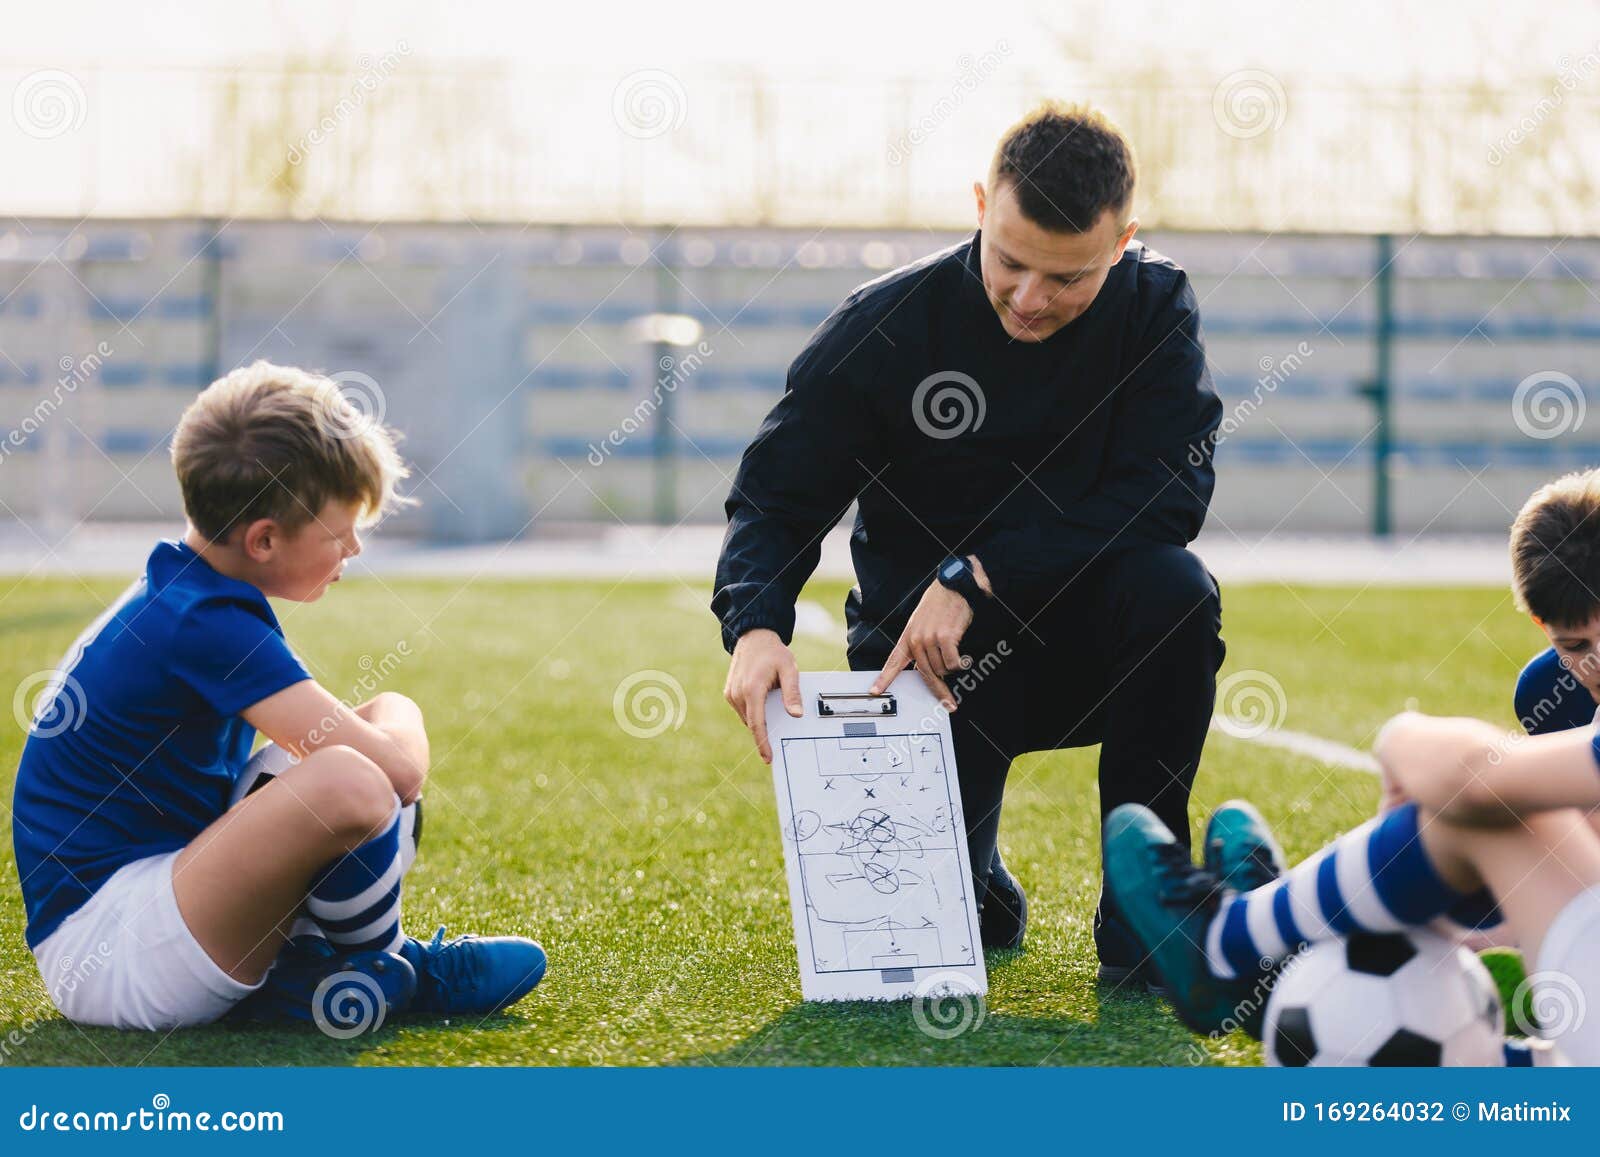 young soccer trainer coach explaining tactic on team sports tactics board